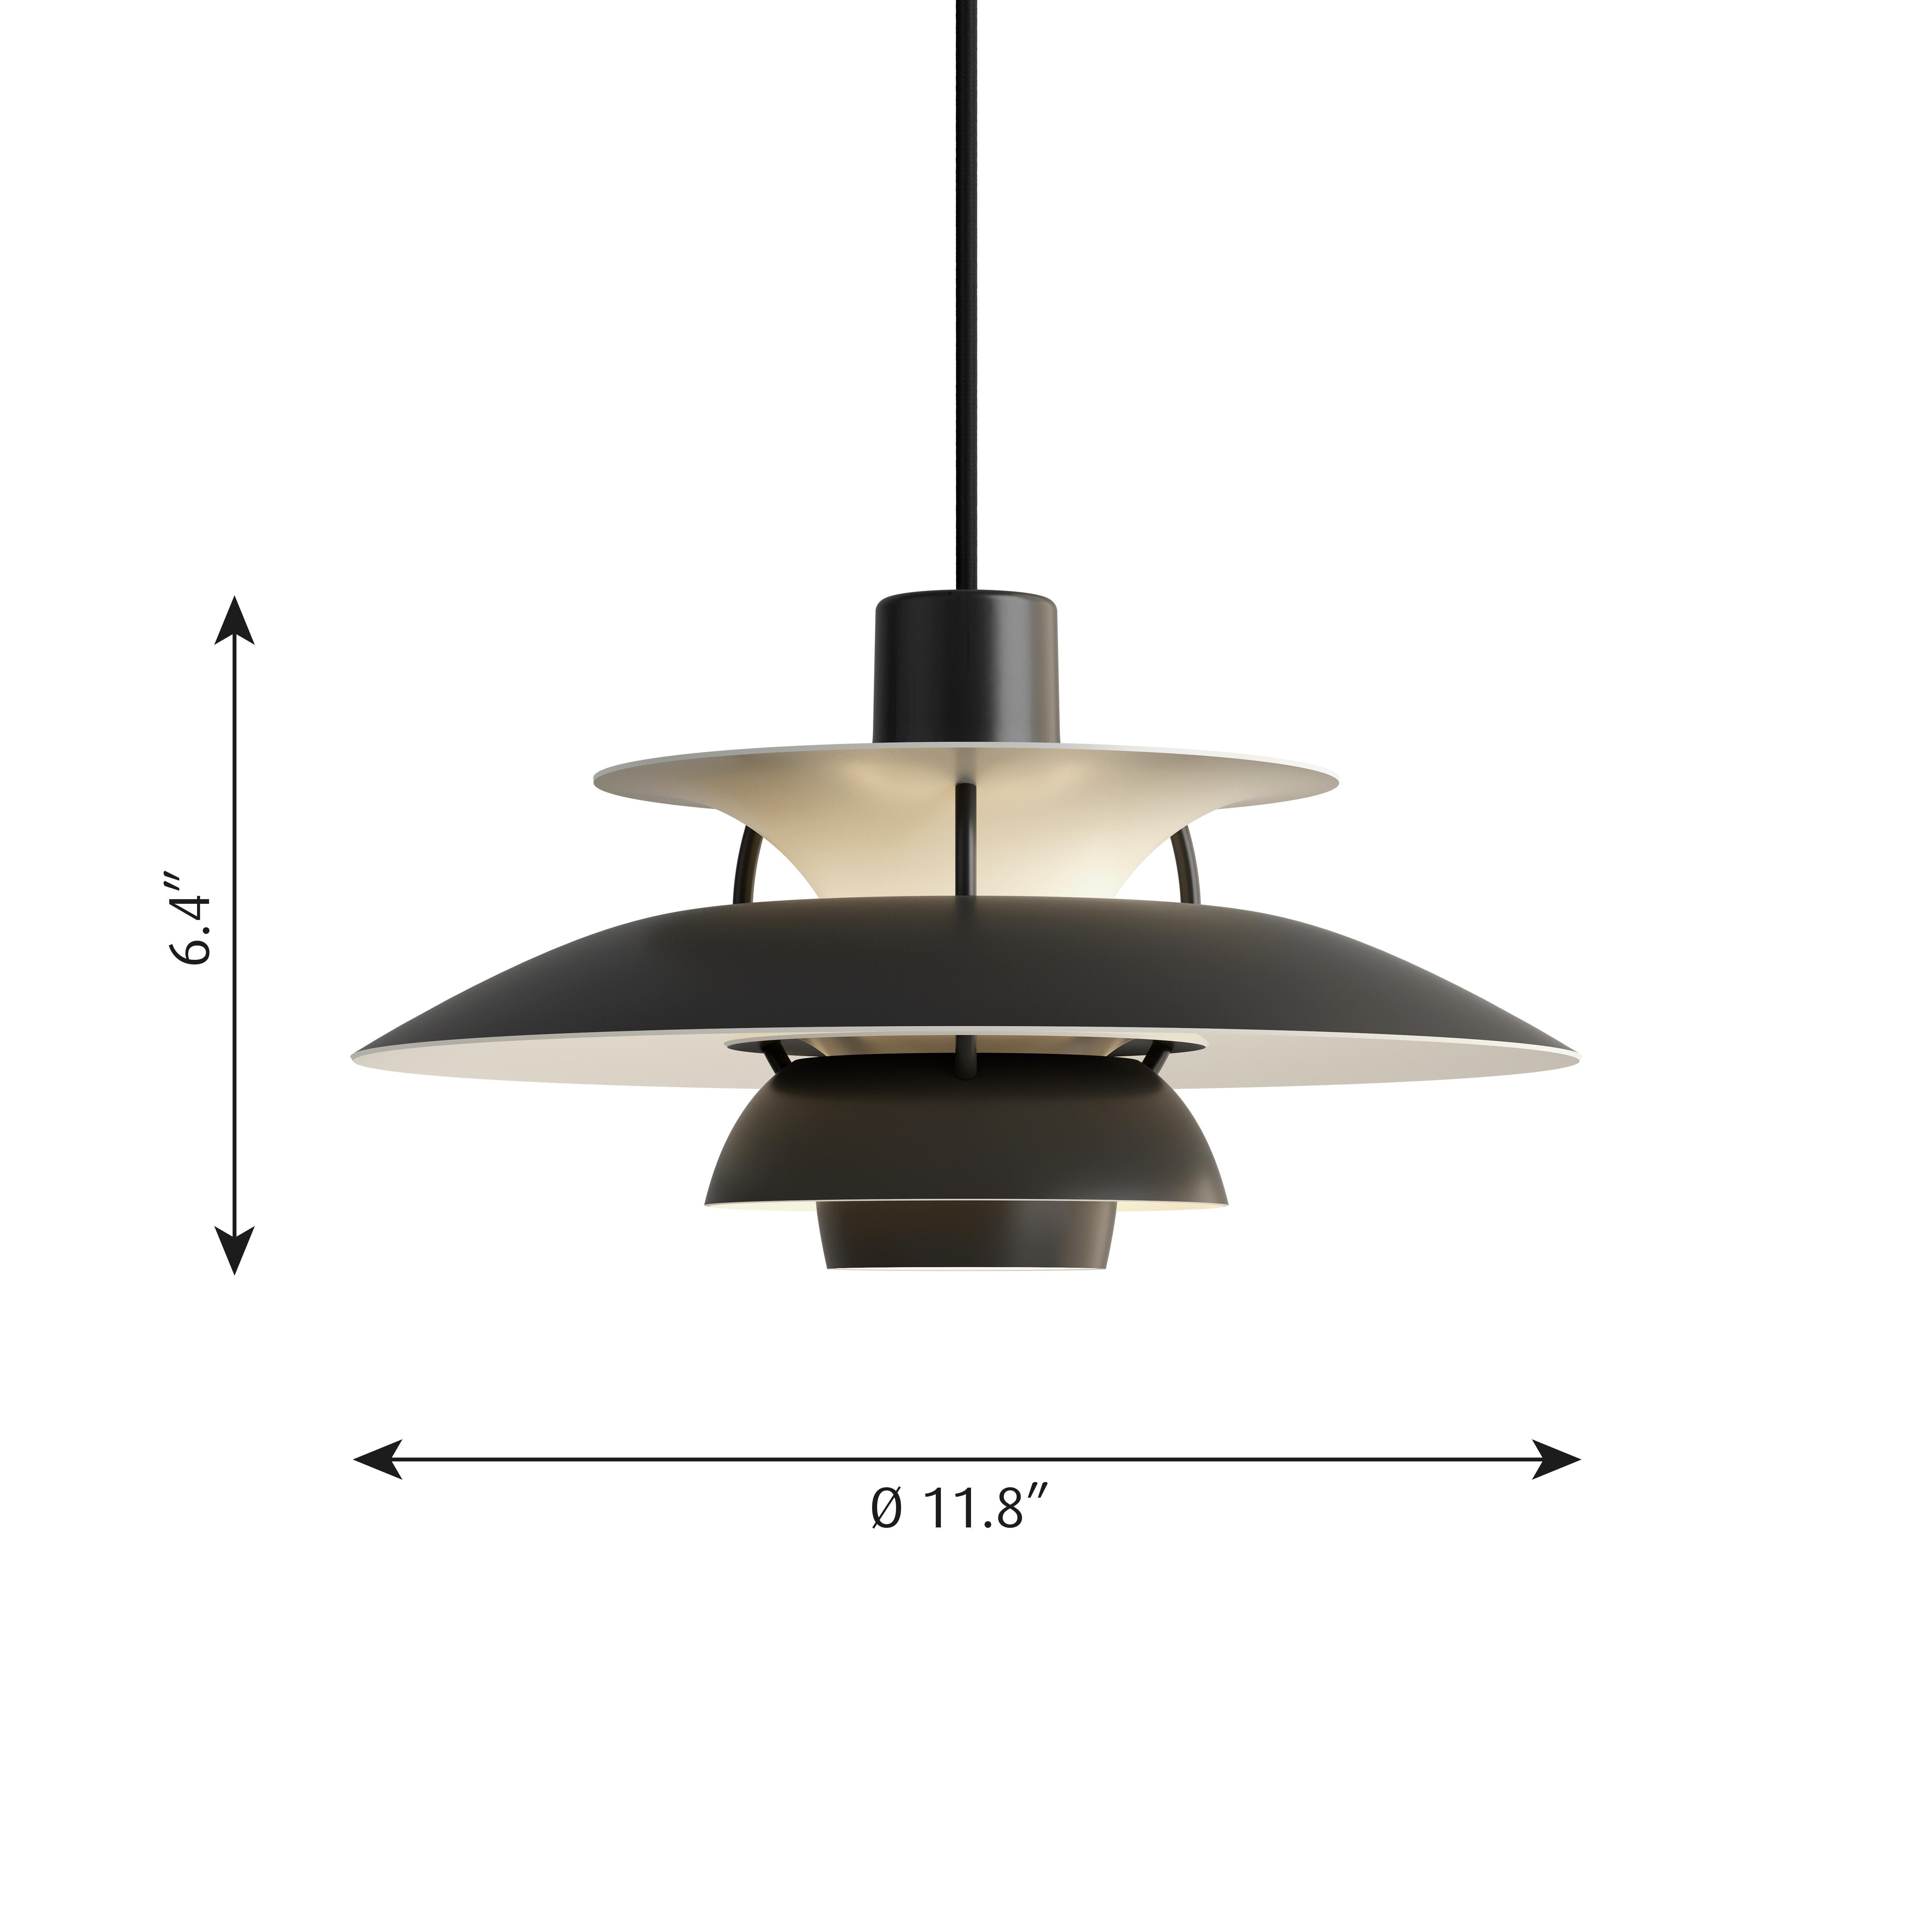 Poul Henningsen PH5 mini pendants for Louis Poulsen in all black. Poul Henningsen originally introduced the full-sized PH 5 pendant light in 1958 as a classic new product. No one knew at the time that it would eventually become synonymous with the